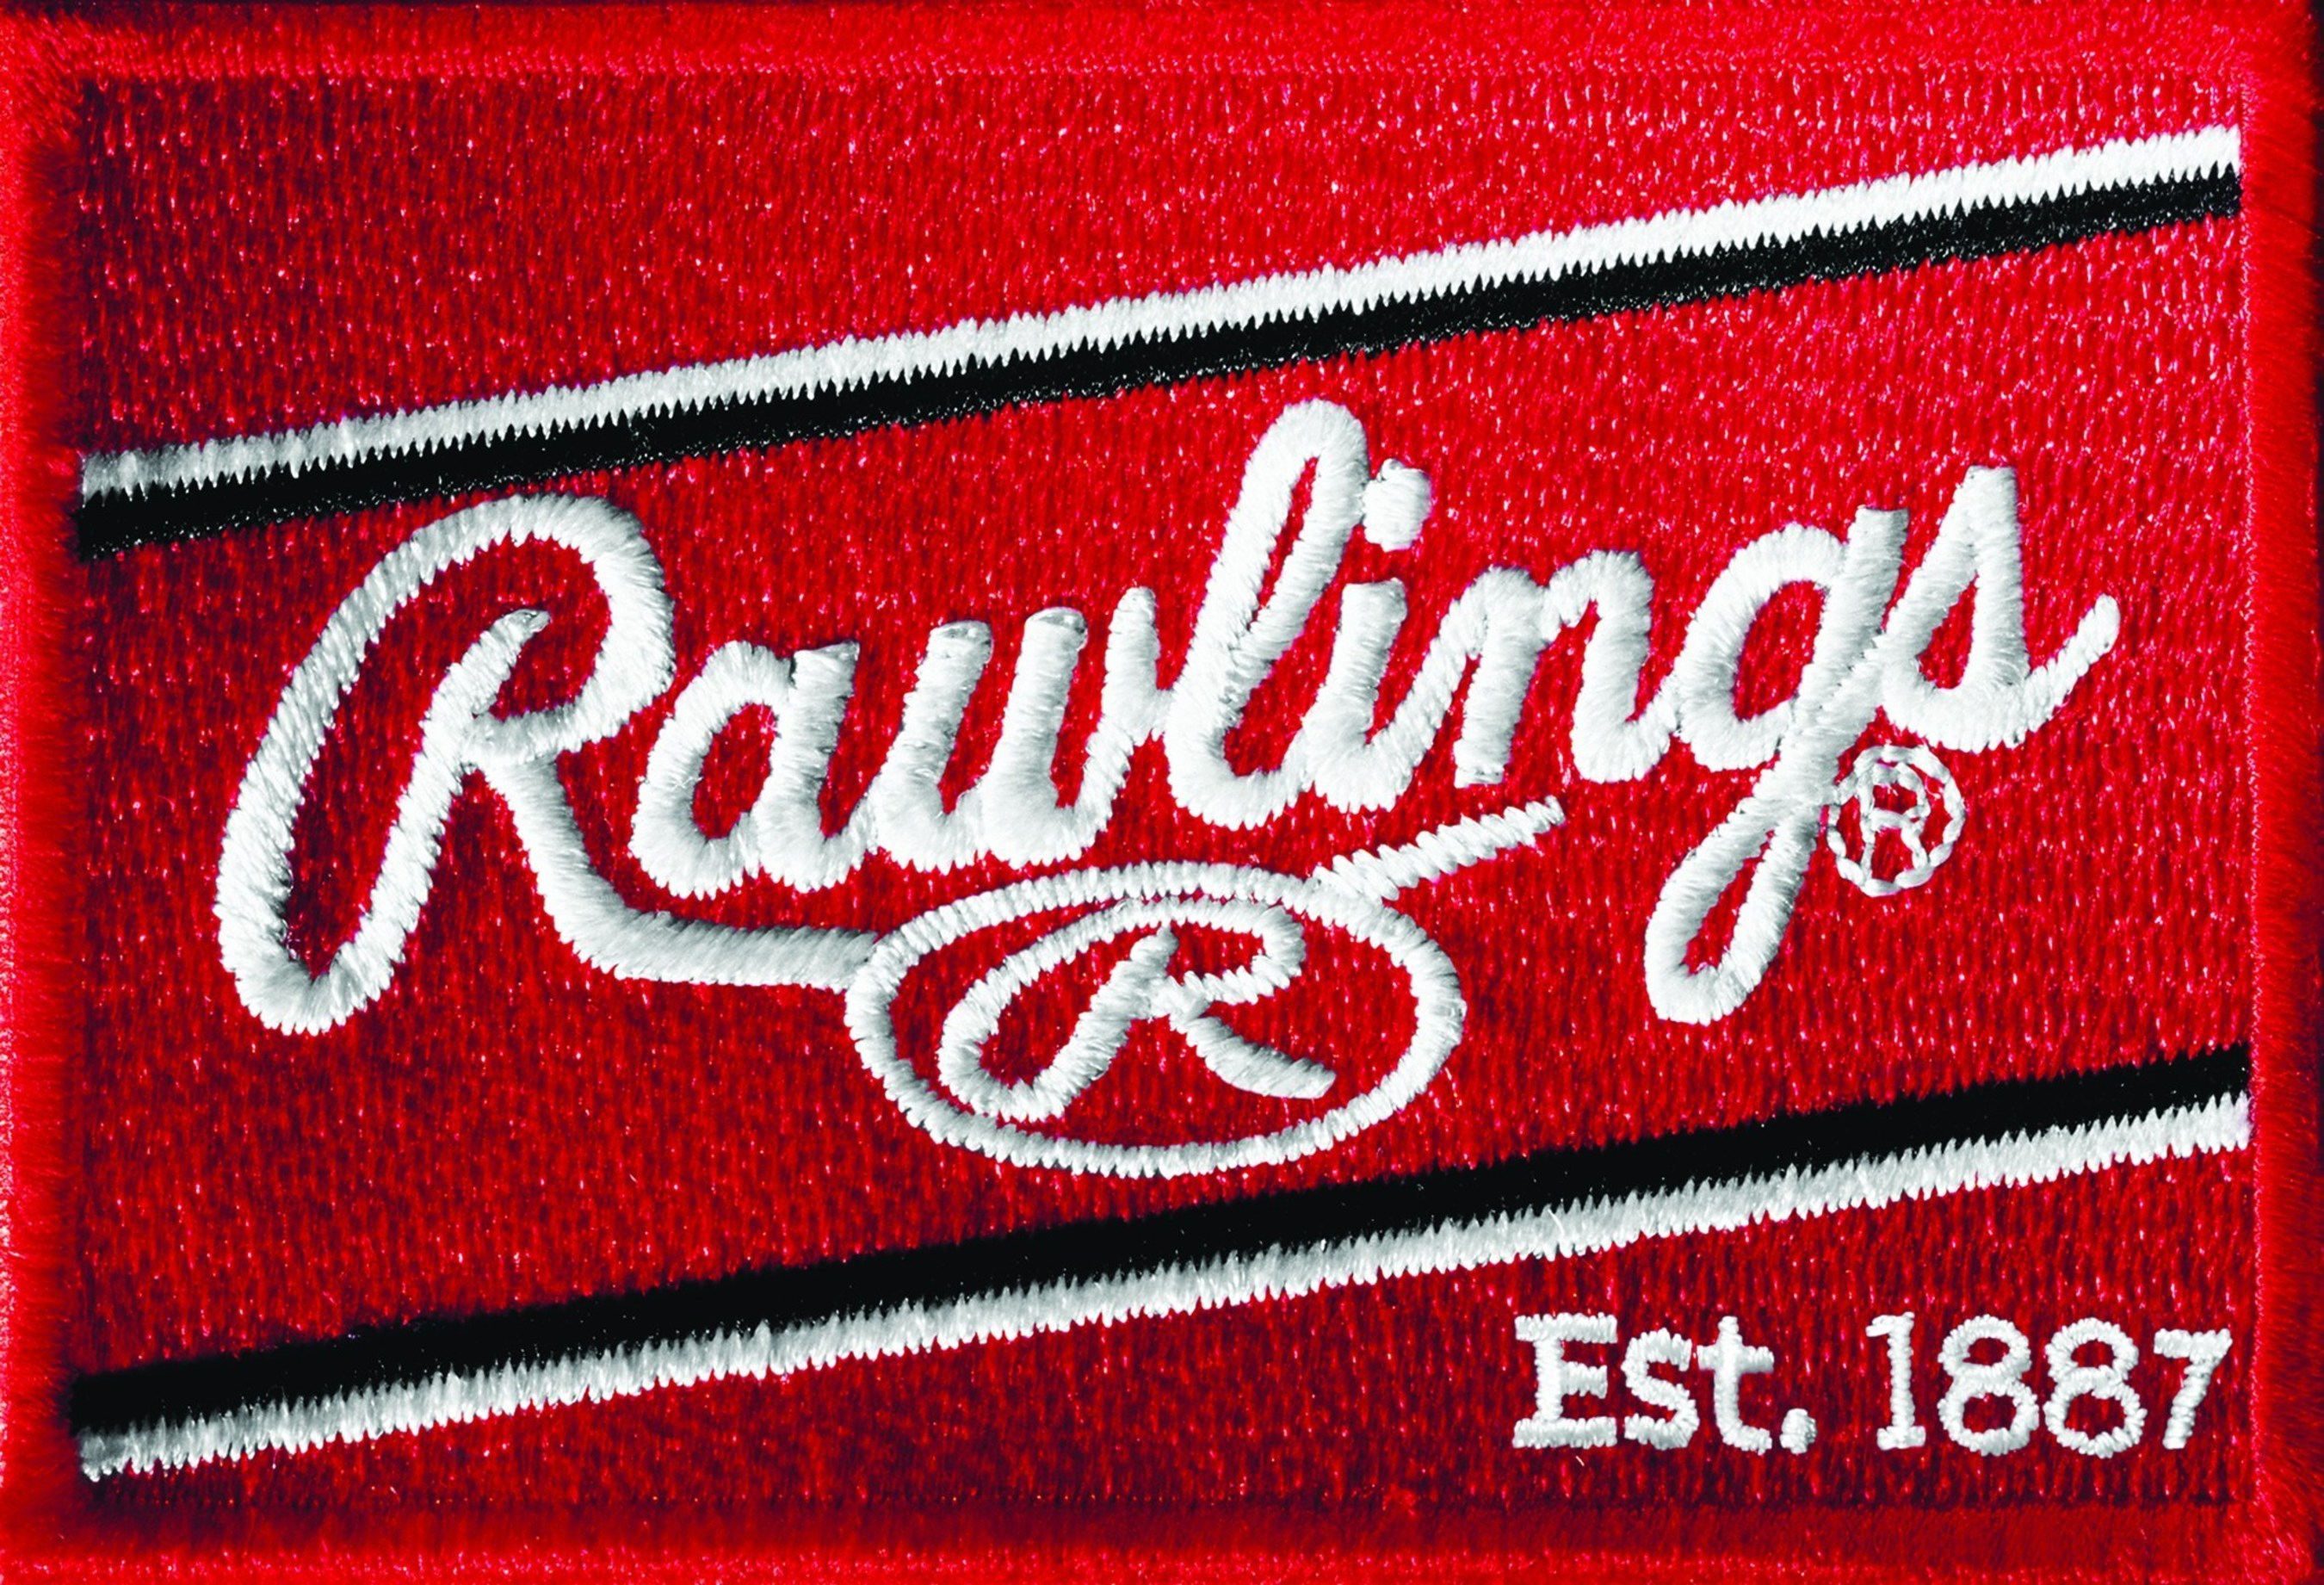 Rawlings' first-ever loyalty program, Rawlings Rewards, aims to incentivize loyal consumers and attract first-time purchasers.